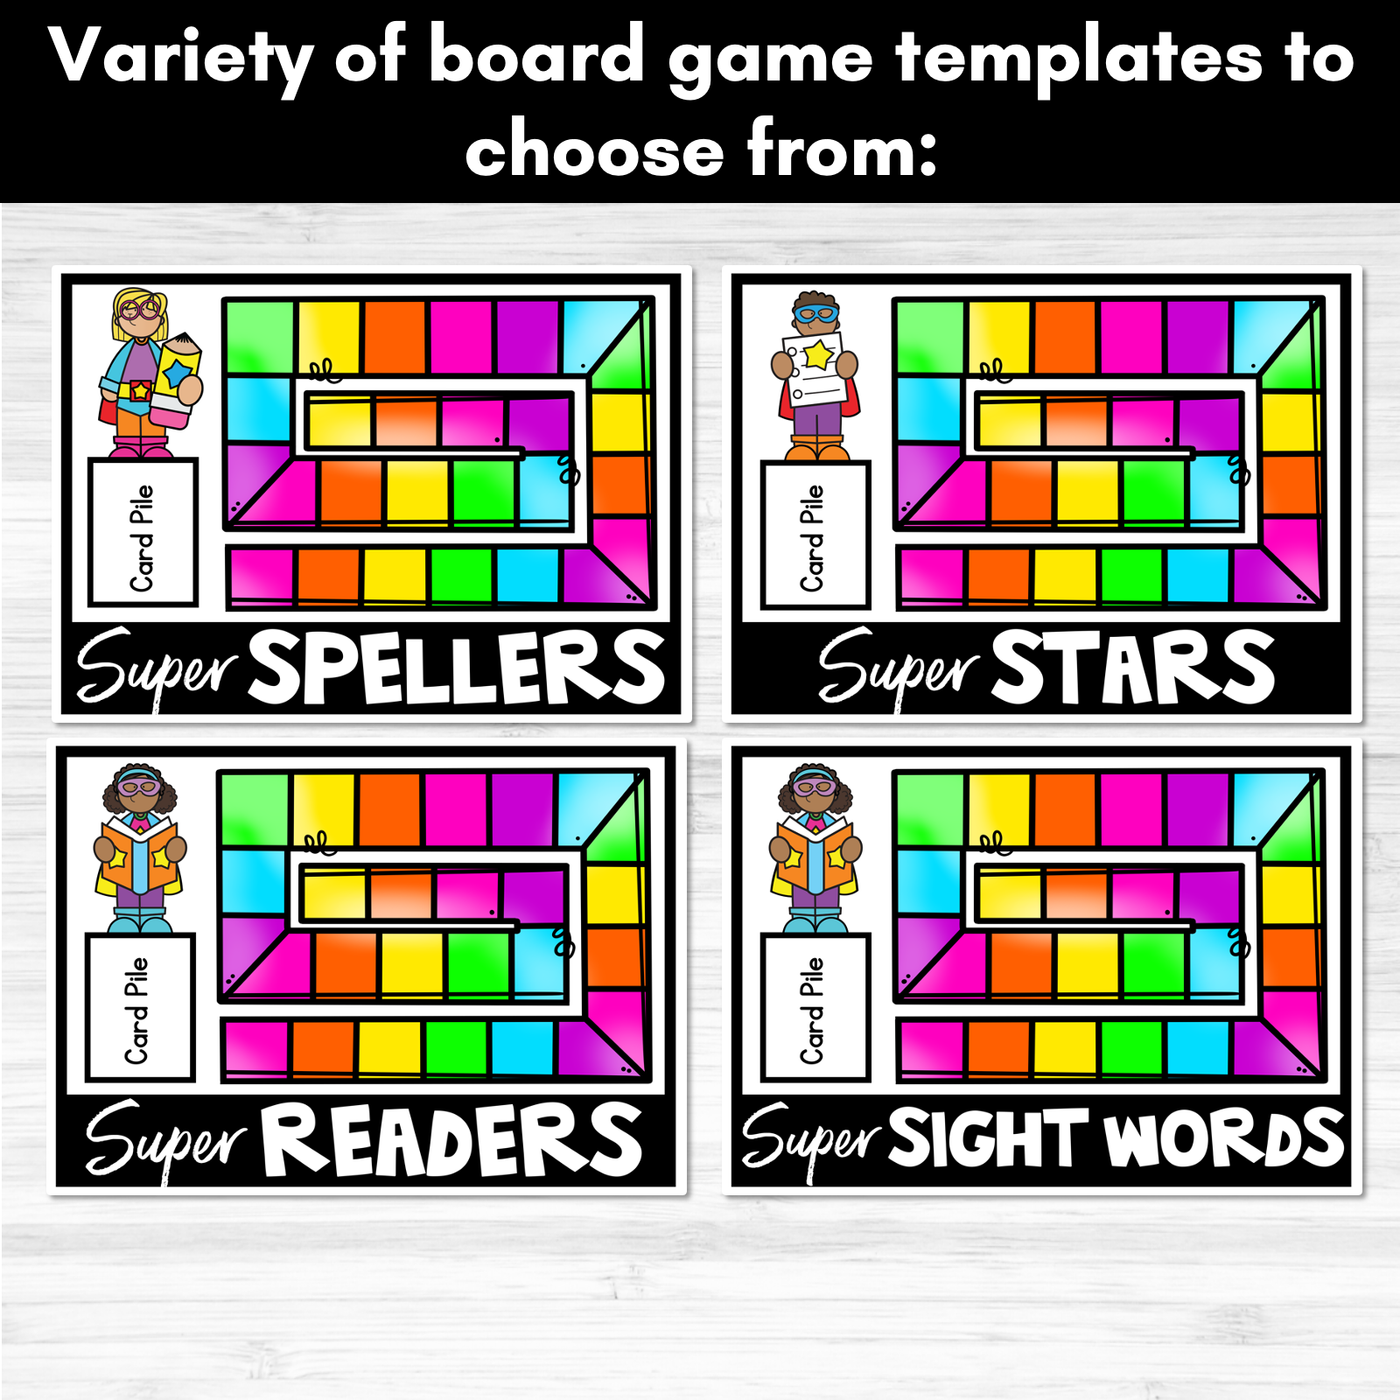 High Frequency Words Board Games - Sight Word Activity